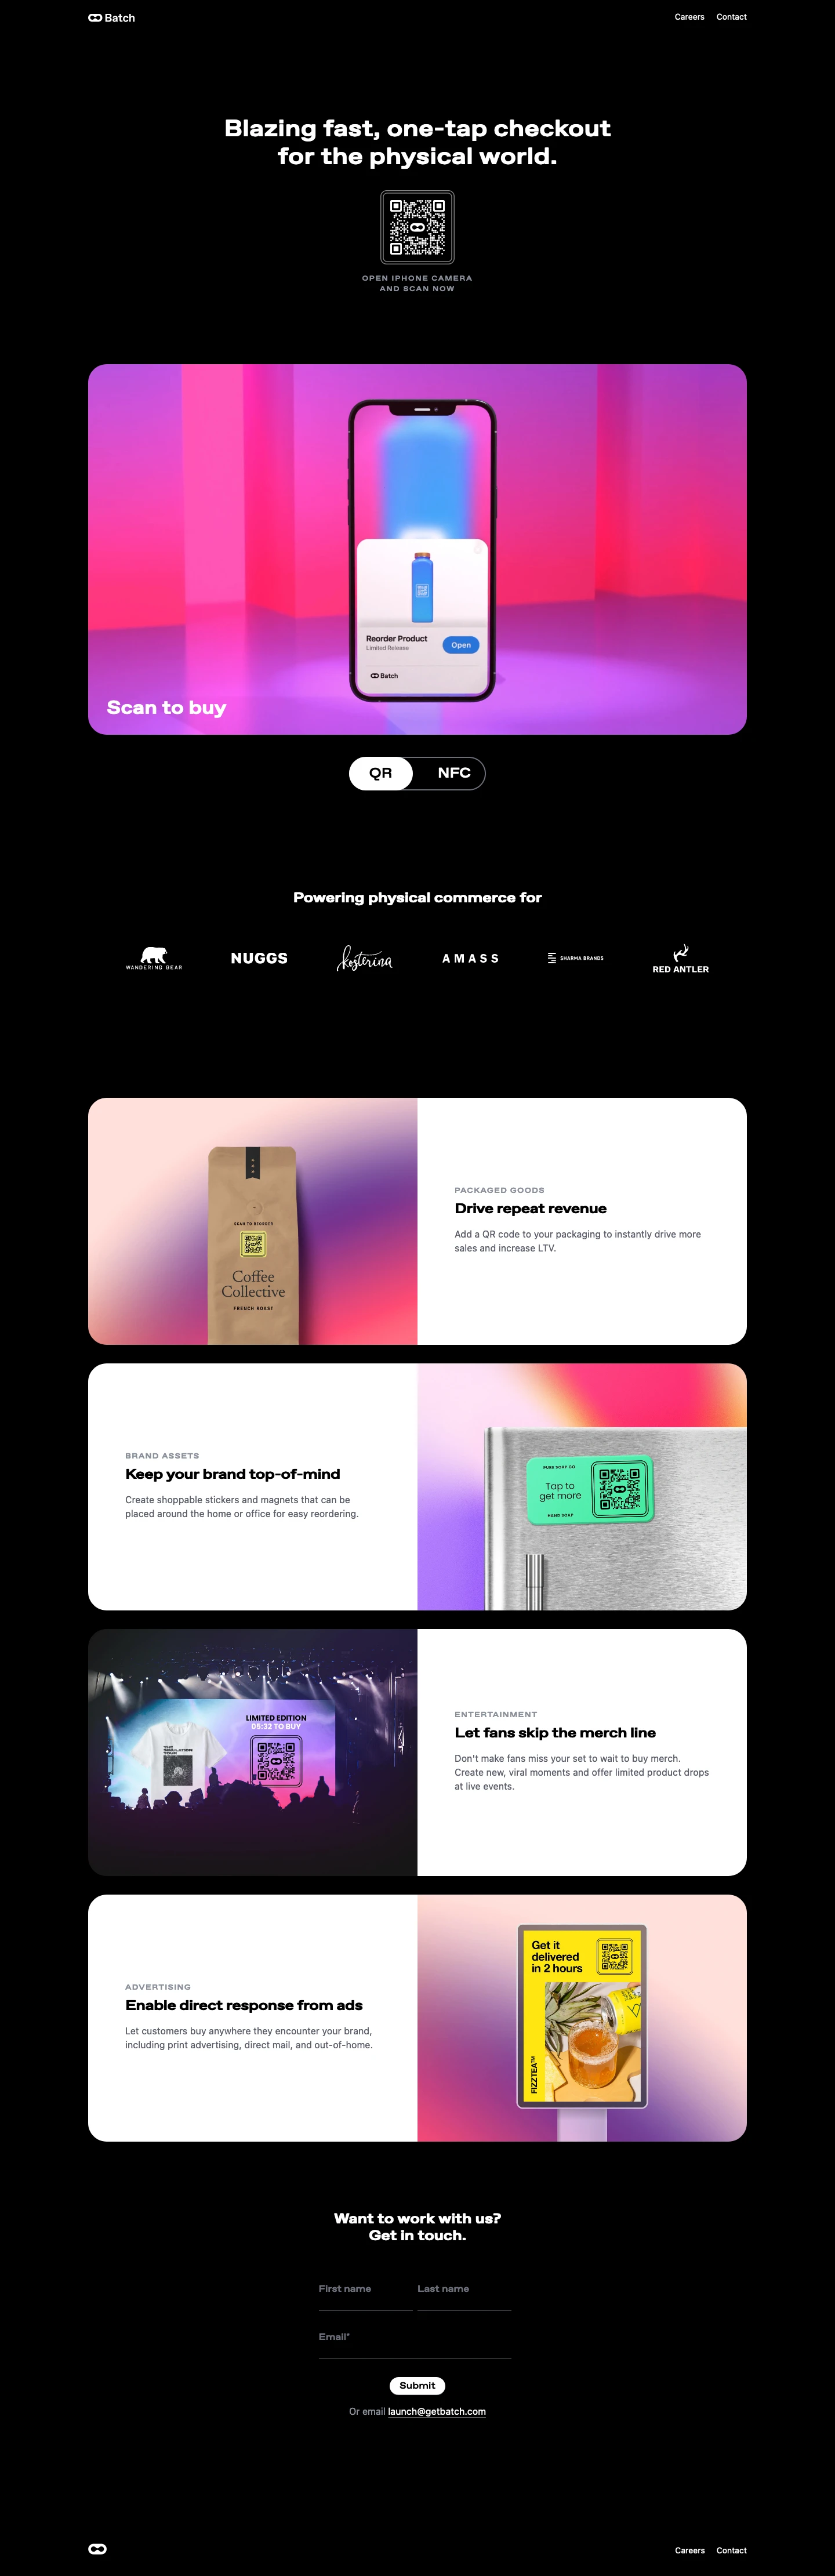 Batch Landing Page Example: Blazing fast, one-tap checkout for the physical world.